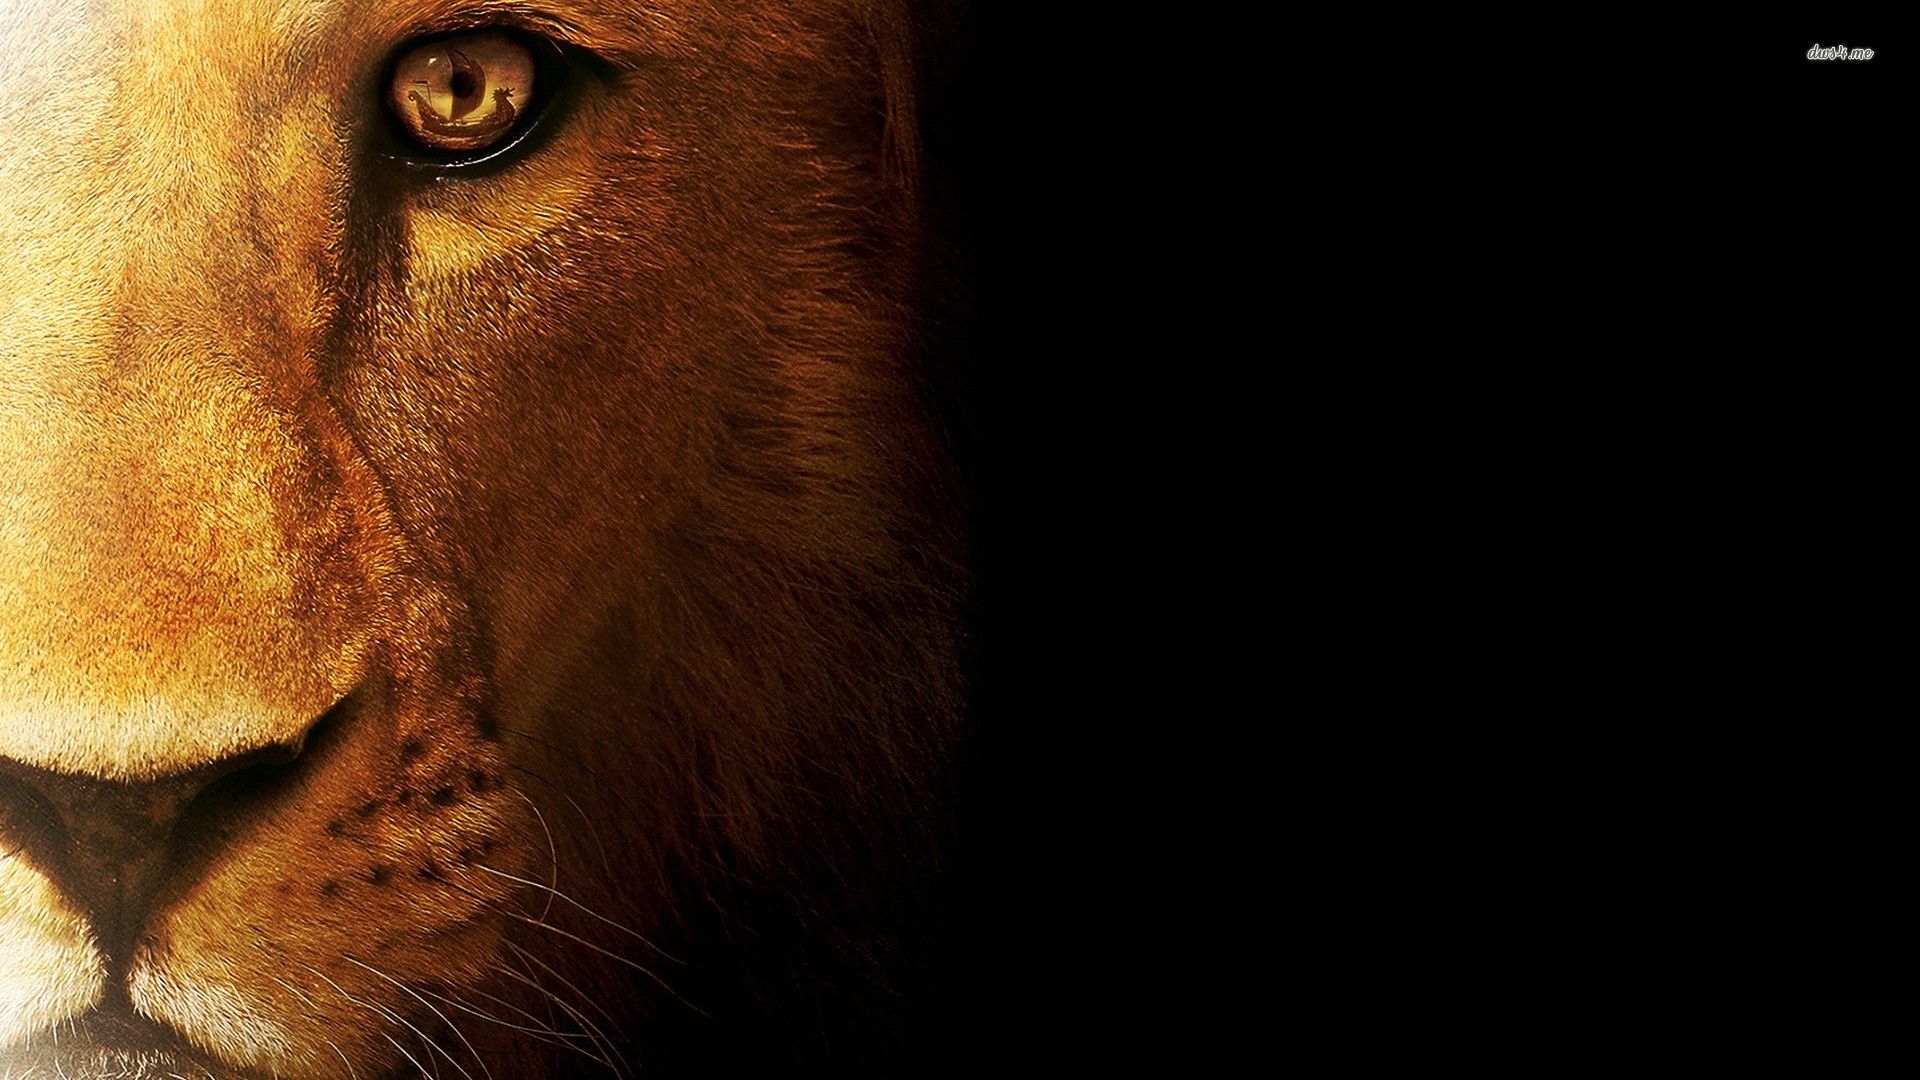 Lion Brave Wallpapers